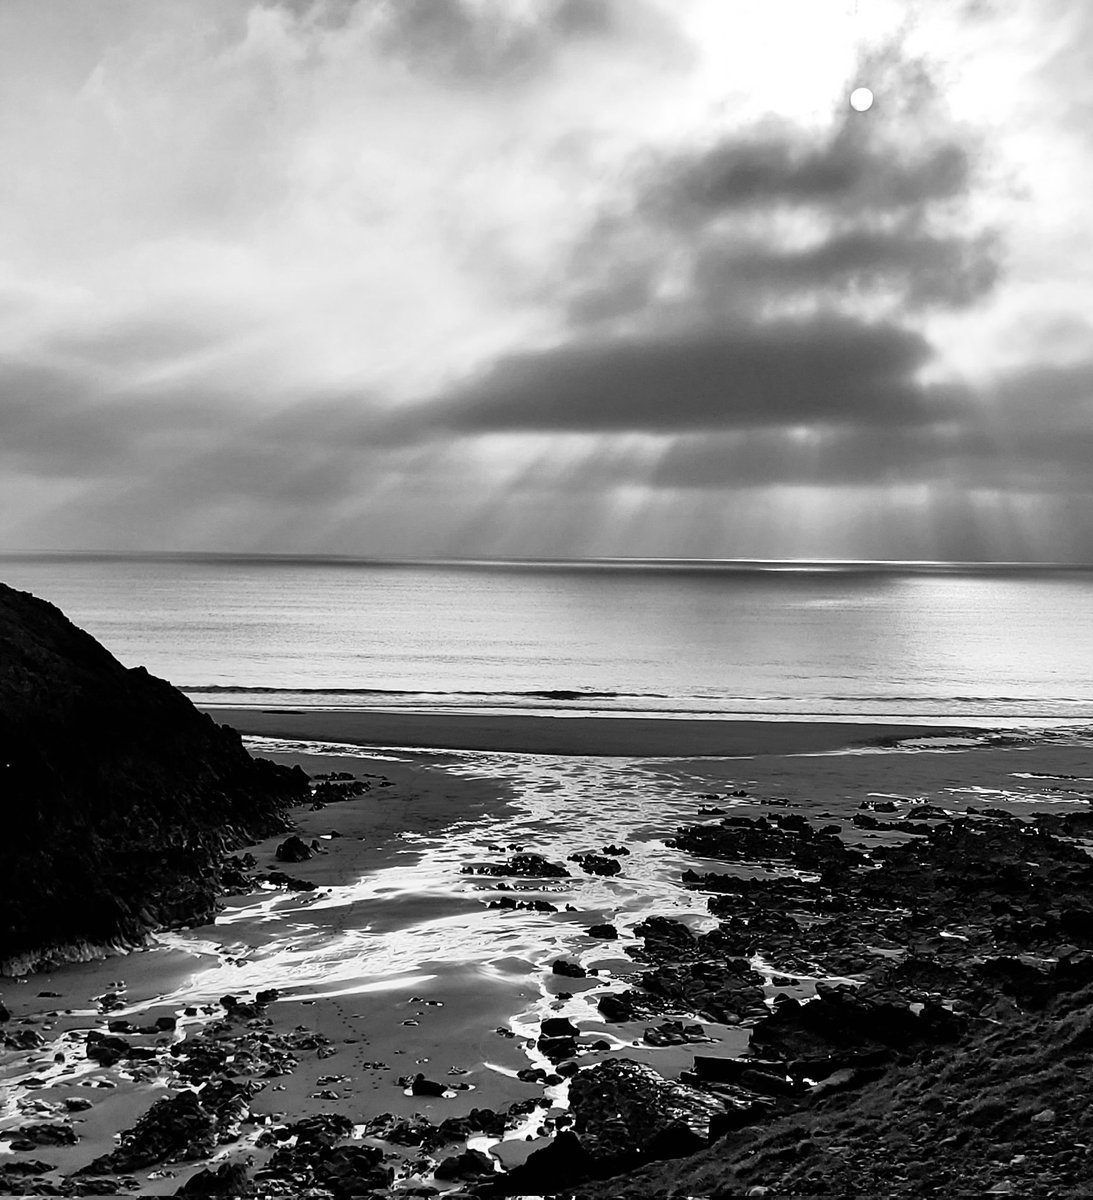 I'm gradually going through my photos from our holiday in the Gower last week. This one of Mewslade Bay really works well in black and white.

#blackandwhitephotography #photography #welshlandscape #landscapephotography #gower #gowerpeninsula #gowercoast #mewsladebay